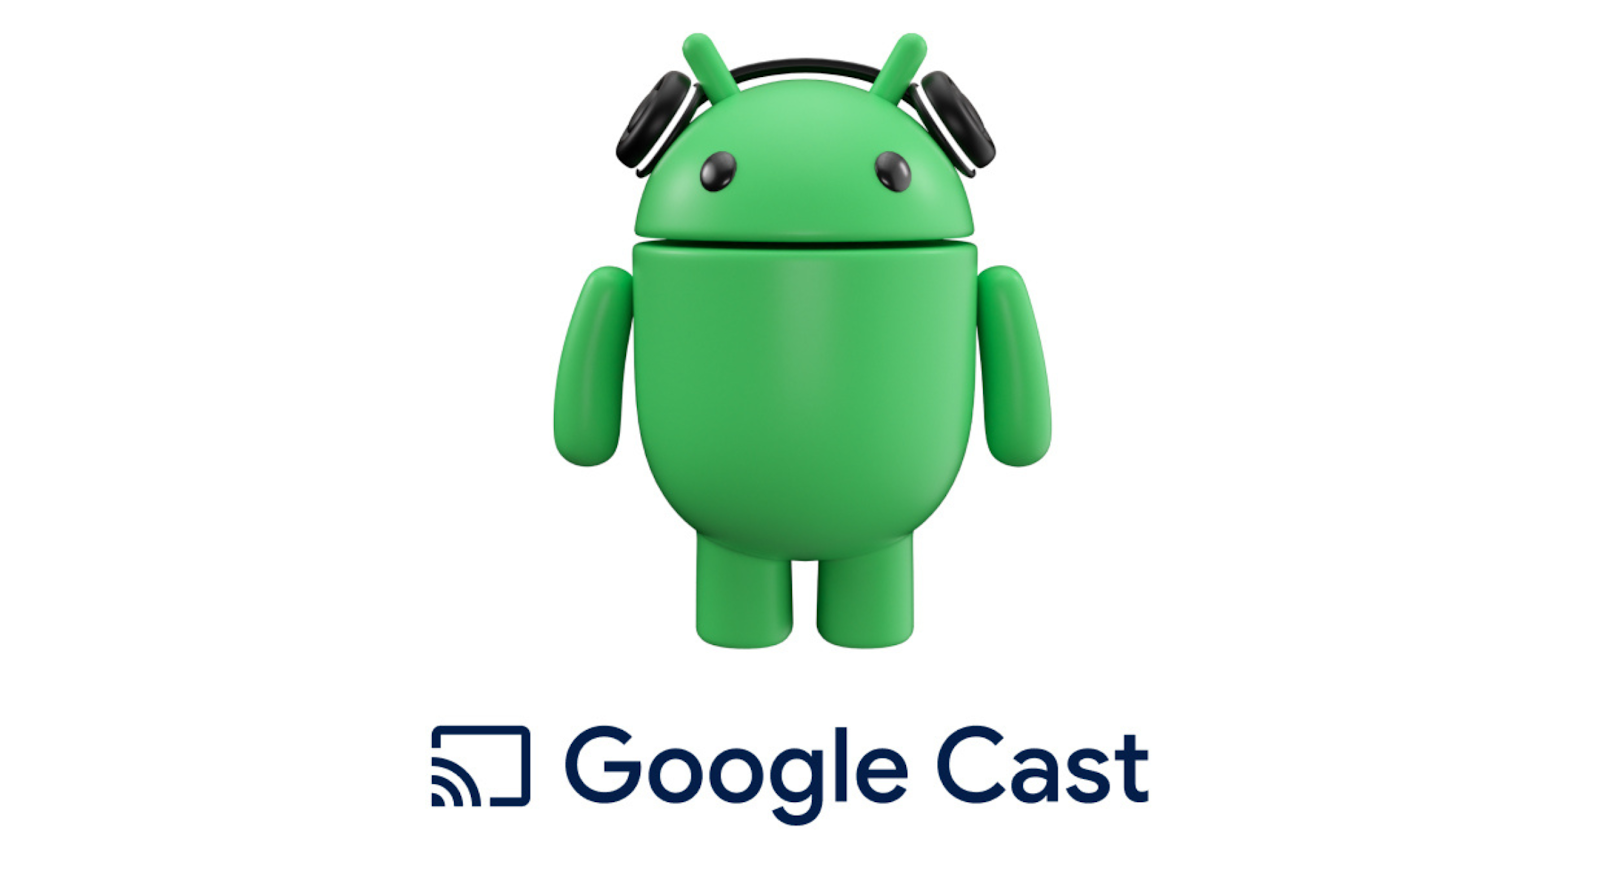 What's new with Google Cast?